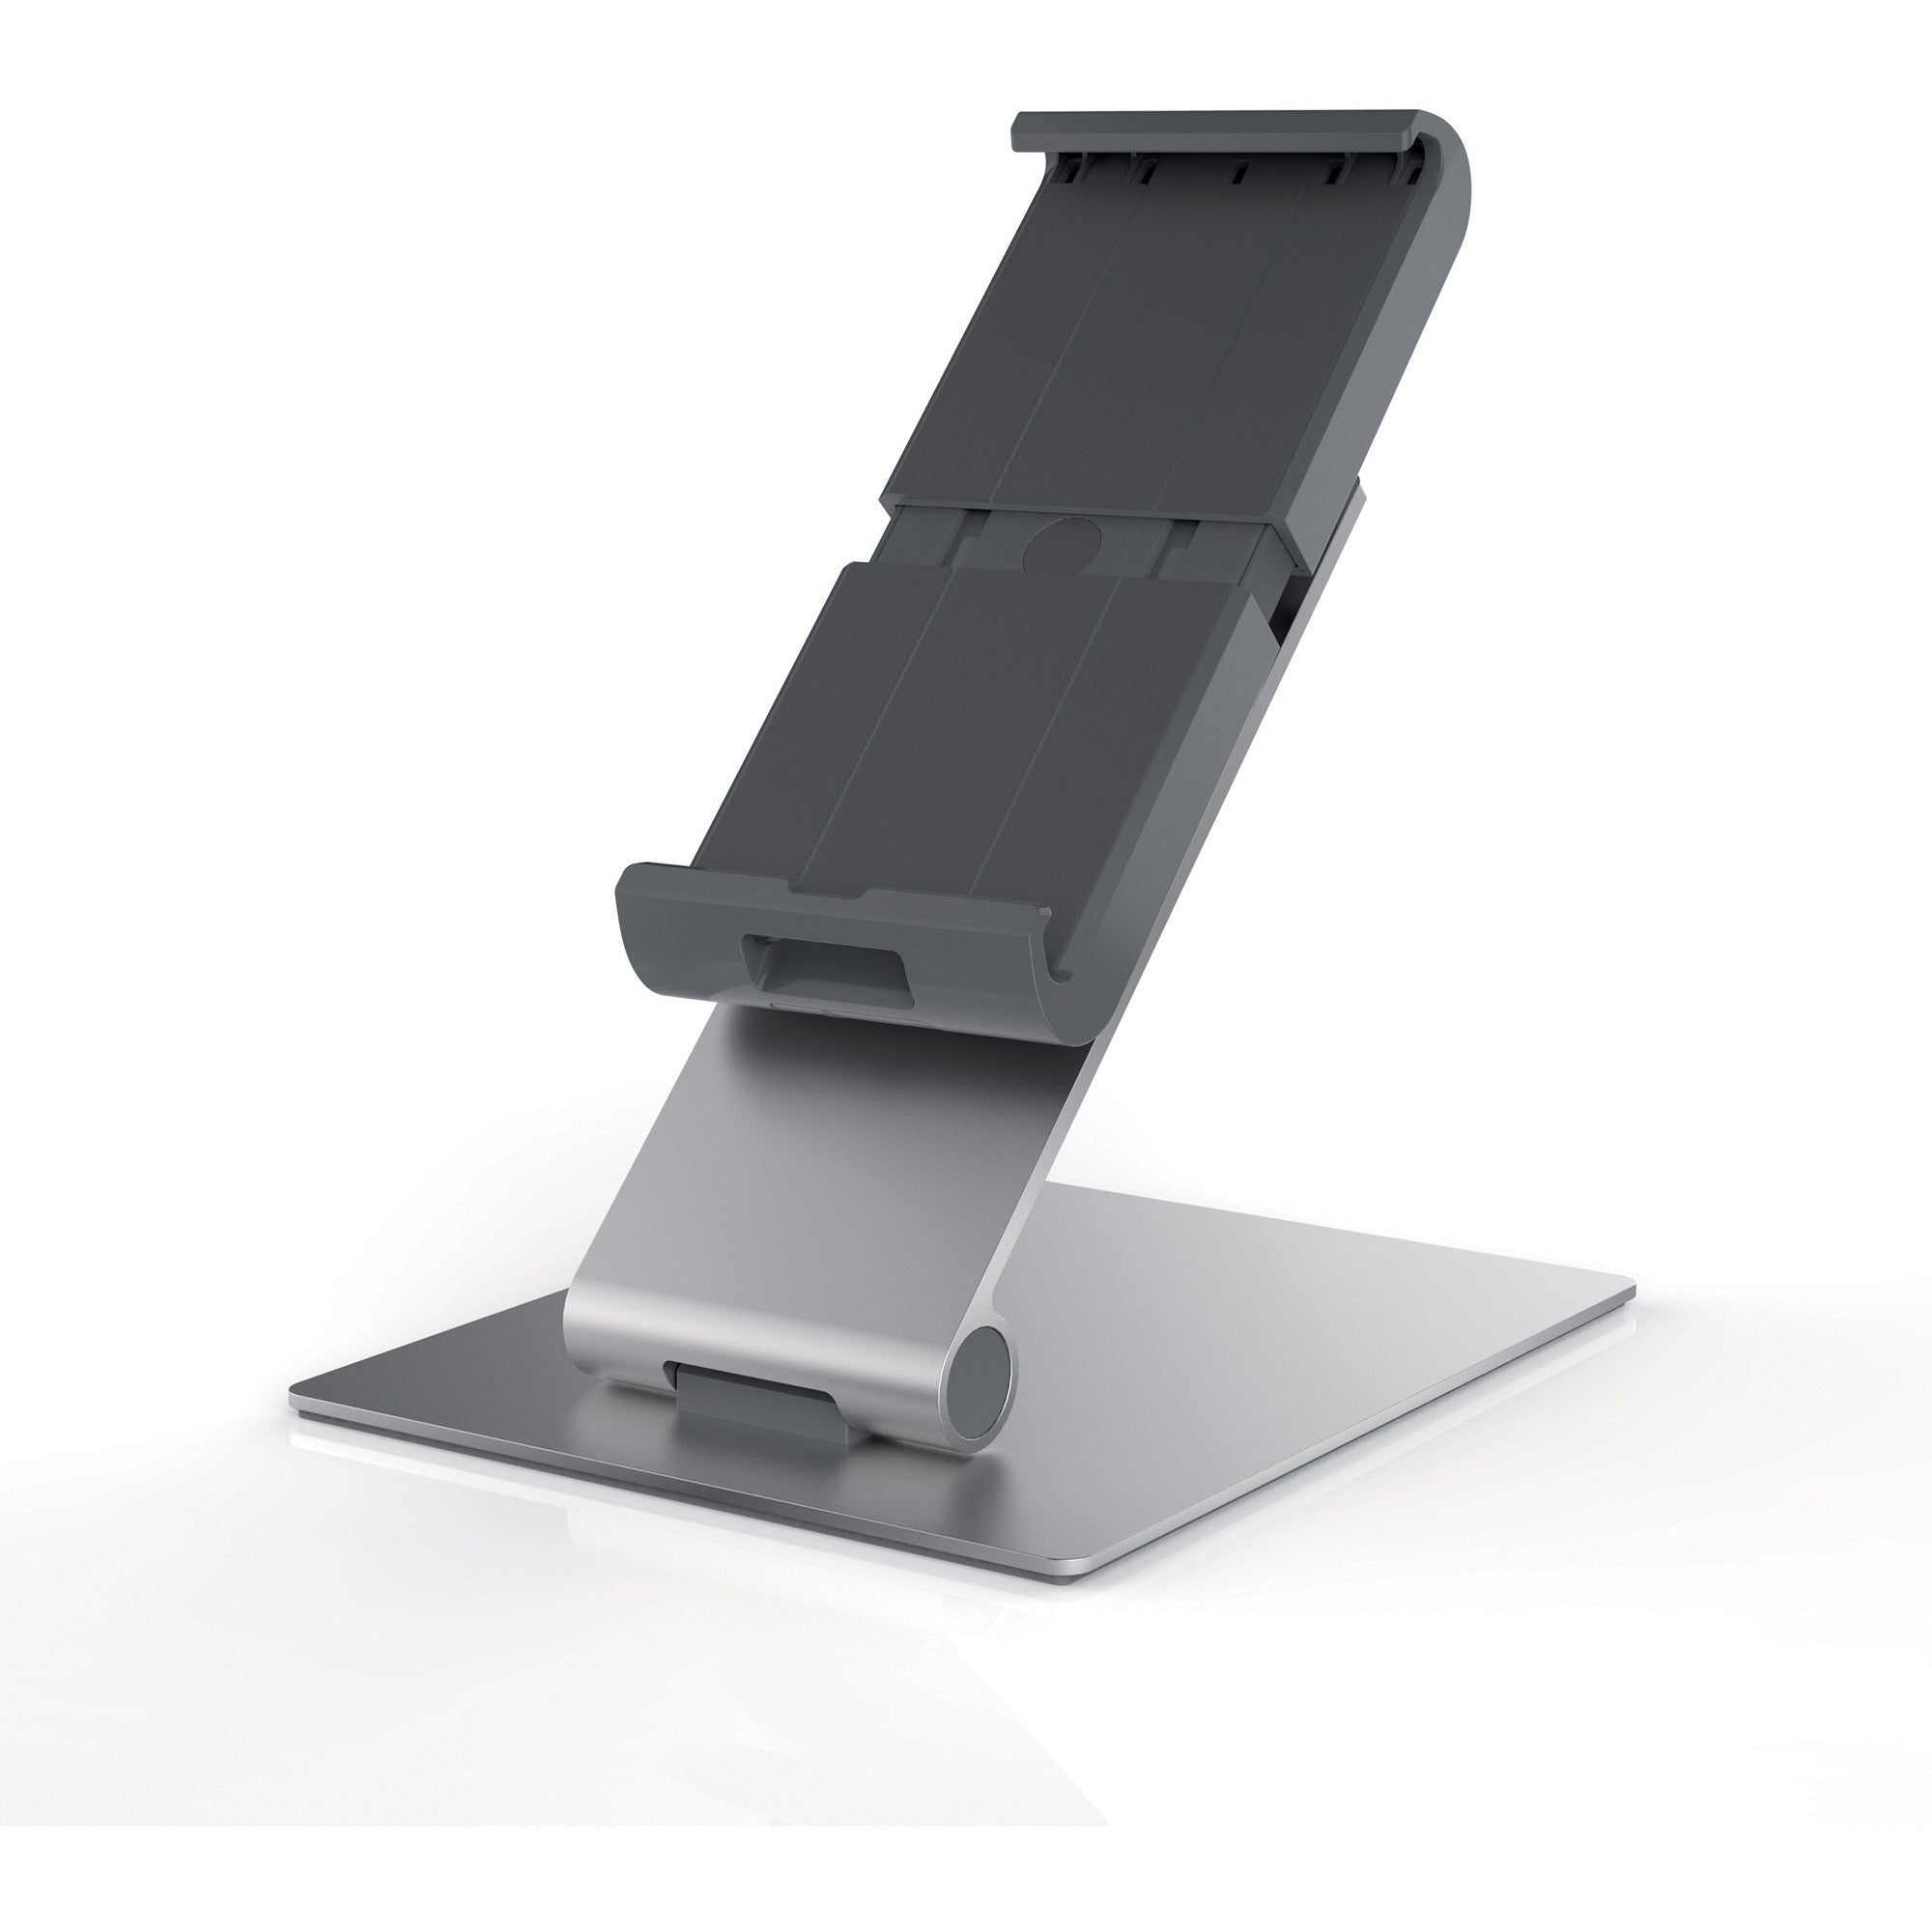 durable-tablet-holder-desk-stand-fits-most-7-13-tablets-360-degrees-rotation-with-anti-theft-device-silver-charcoal_dbl893023 - 1